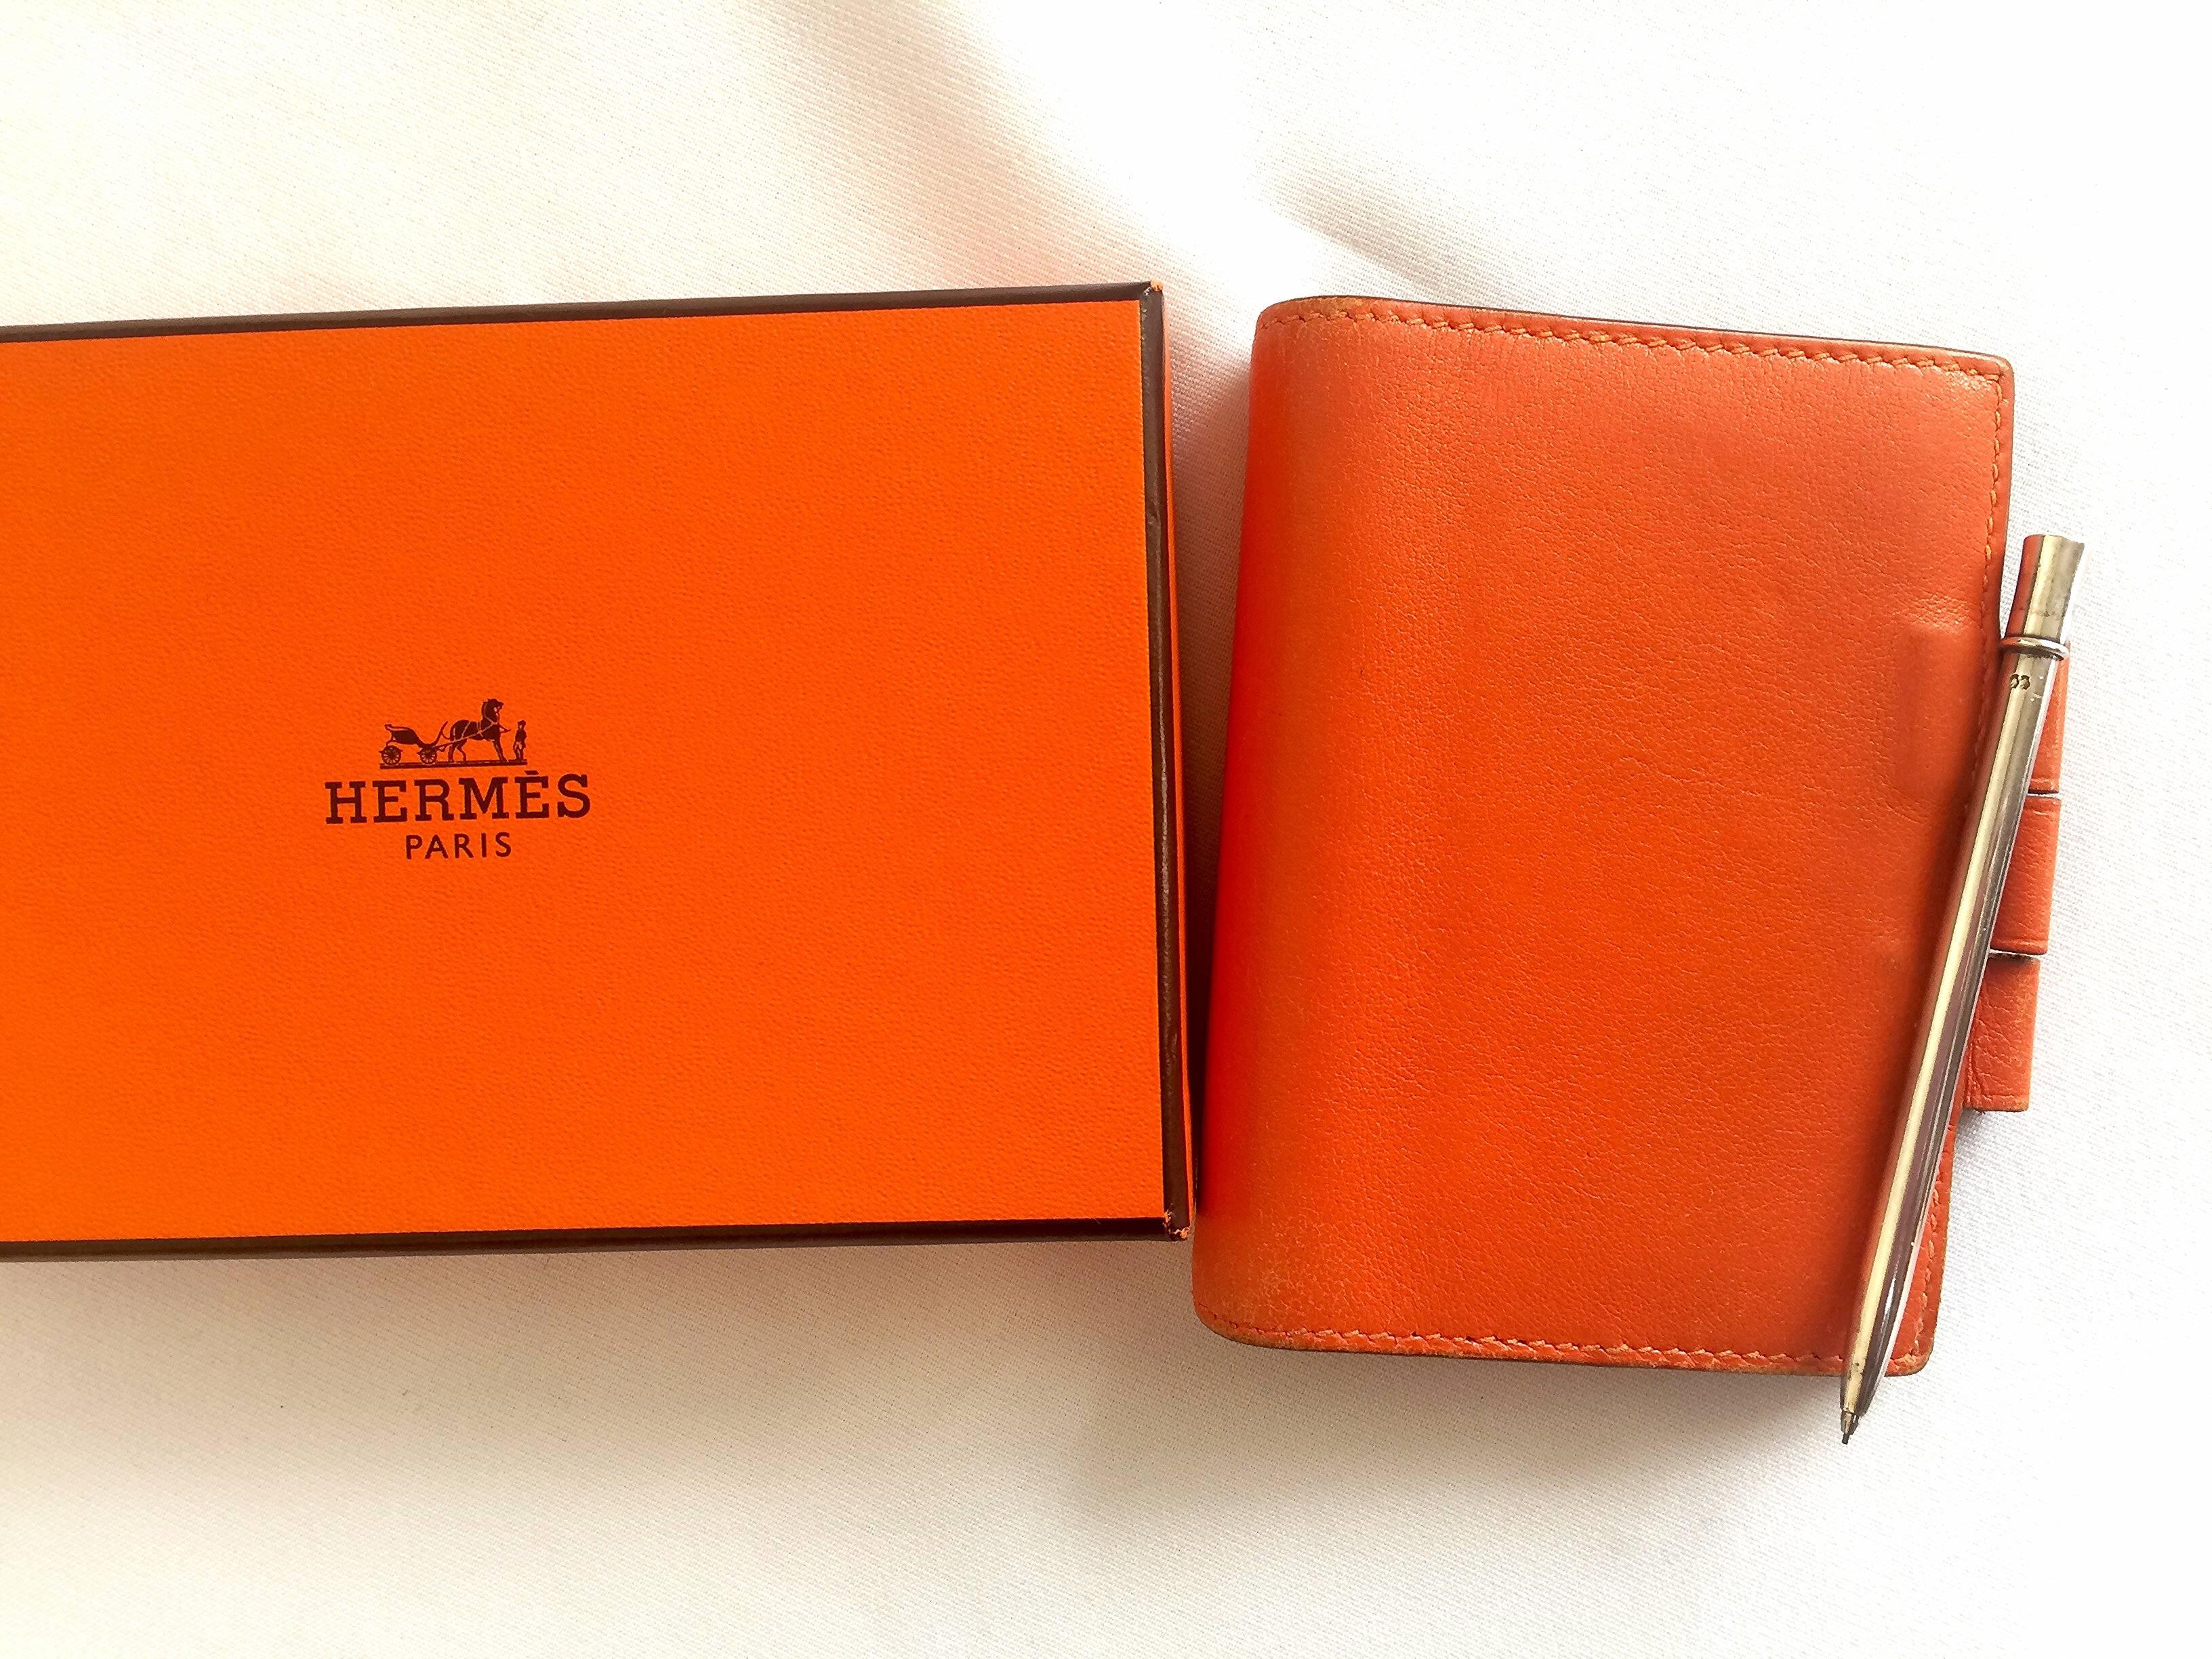 Vintage HERMES genuine orange leather diary, schedule book cover PM with silver mechanical pencil. Perfect professional stationery.

Introducing a  vintage diary/schedule book leather cover PM size from HERMES.
Perfect vintage stationery for